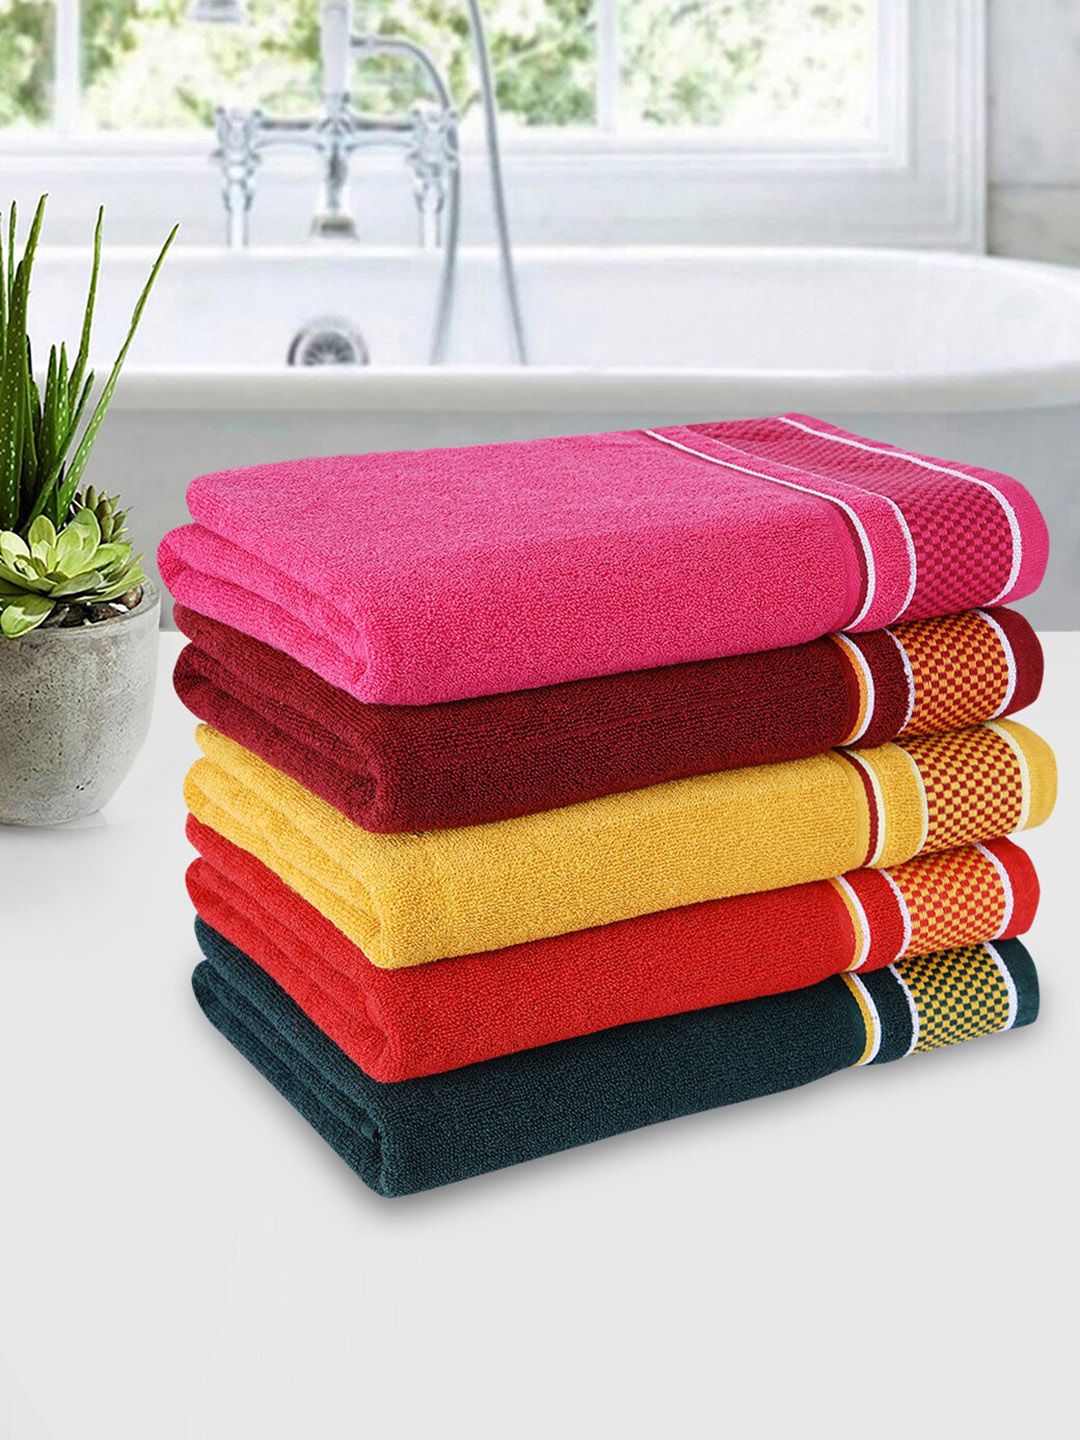 ROMEE Set Of 5 500 GSM Cotton Bath Towels Price in India